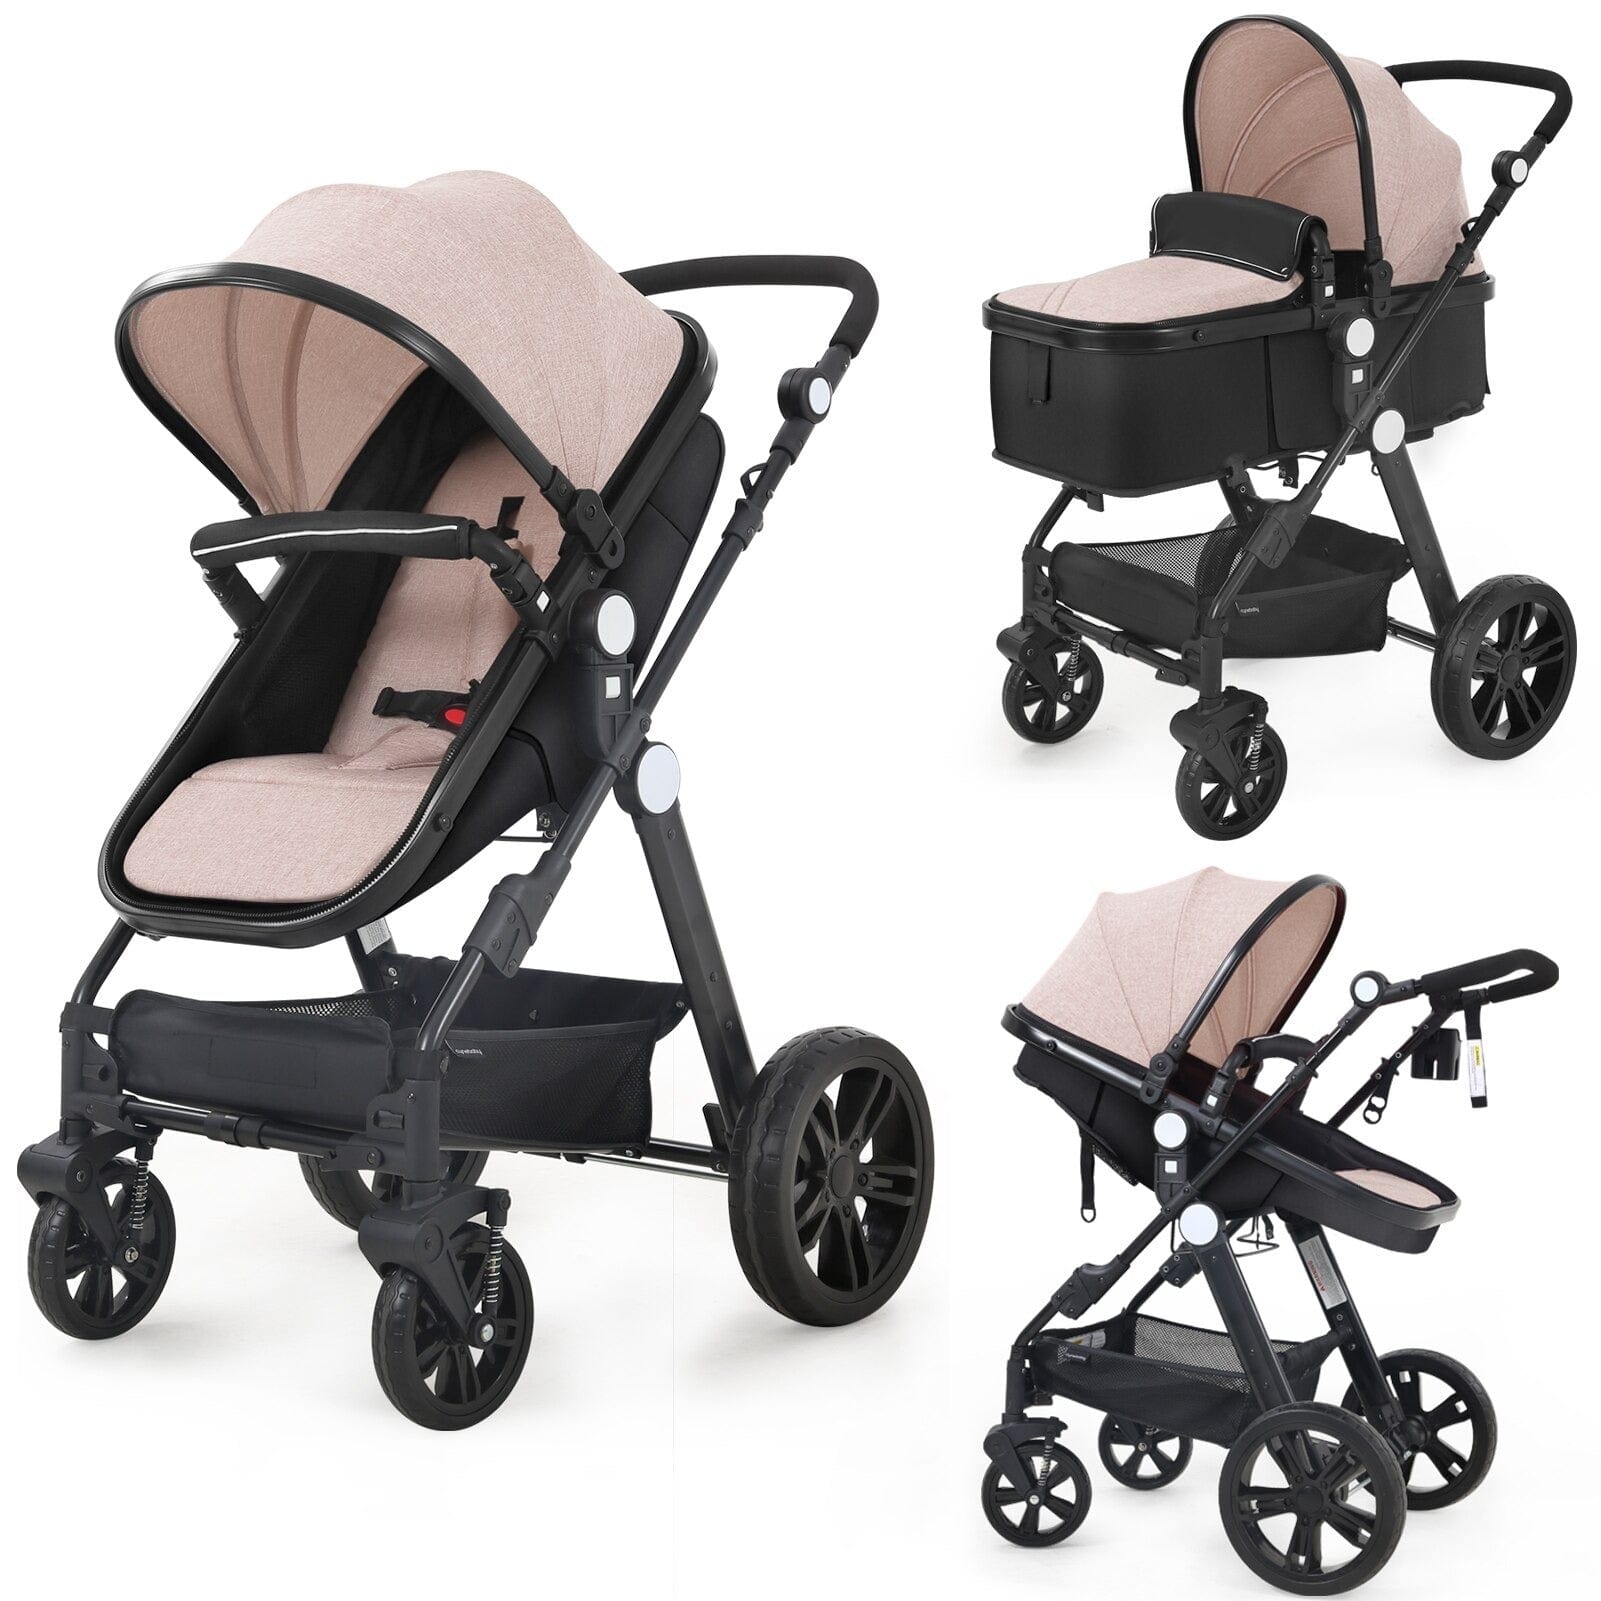 Proactive Baby Pink CyneBaby High-view Baby Stroller With Reversible Cradle